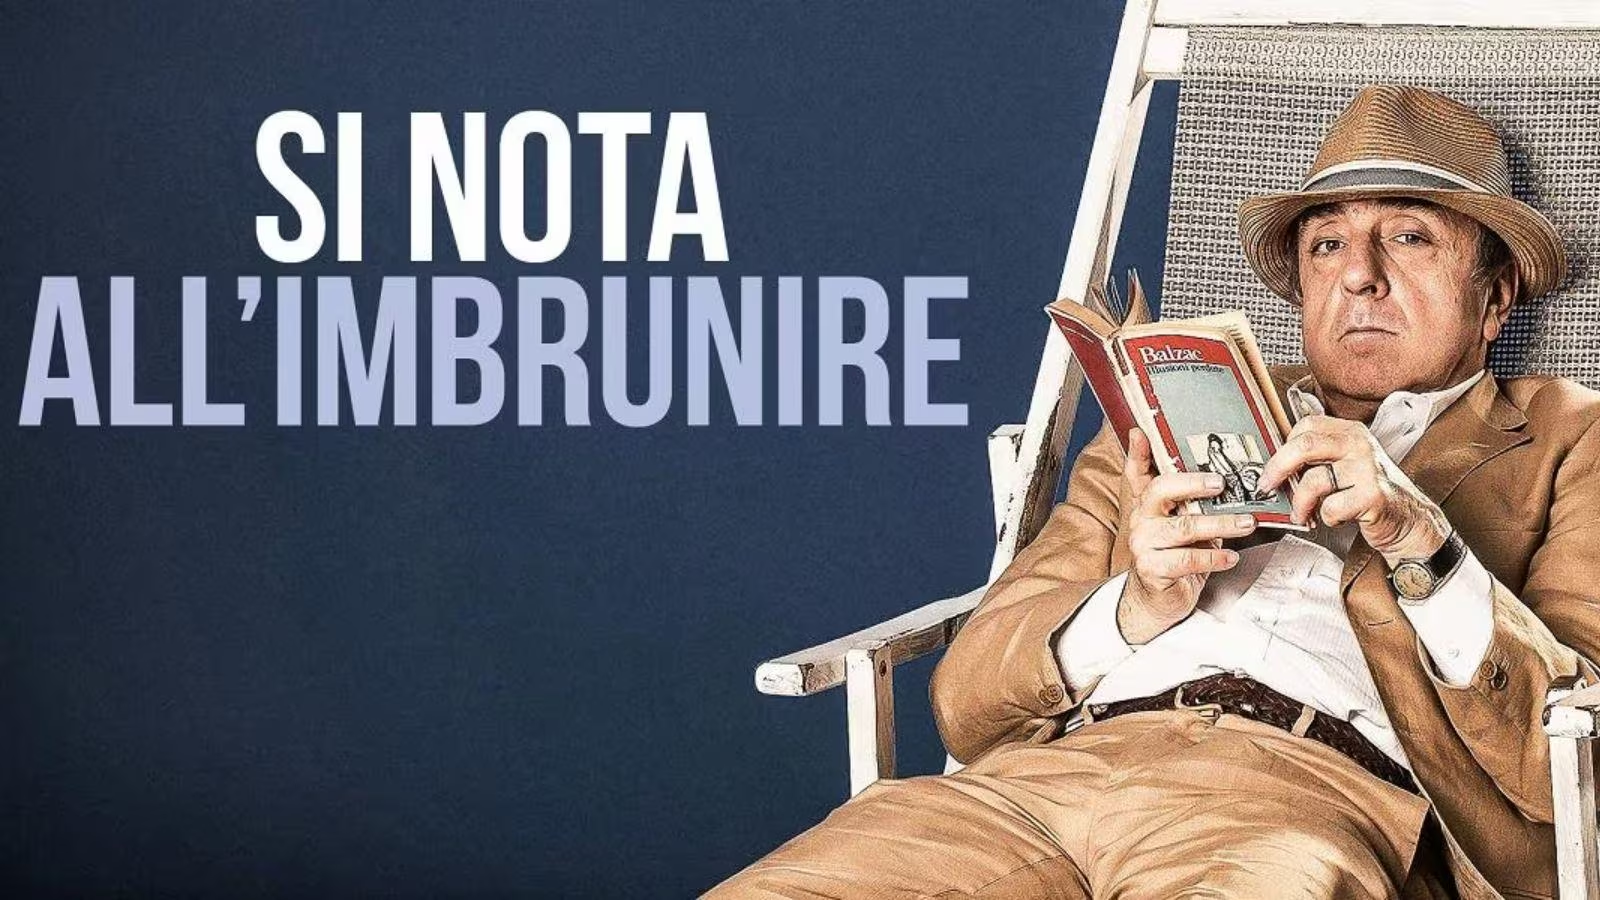 si nota all'imbrunire